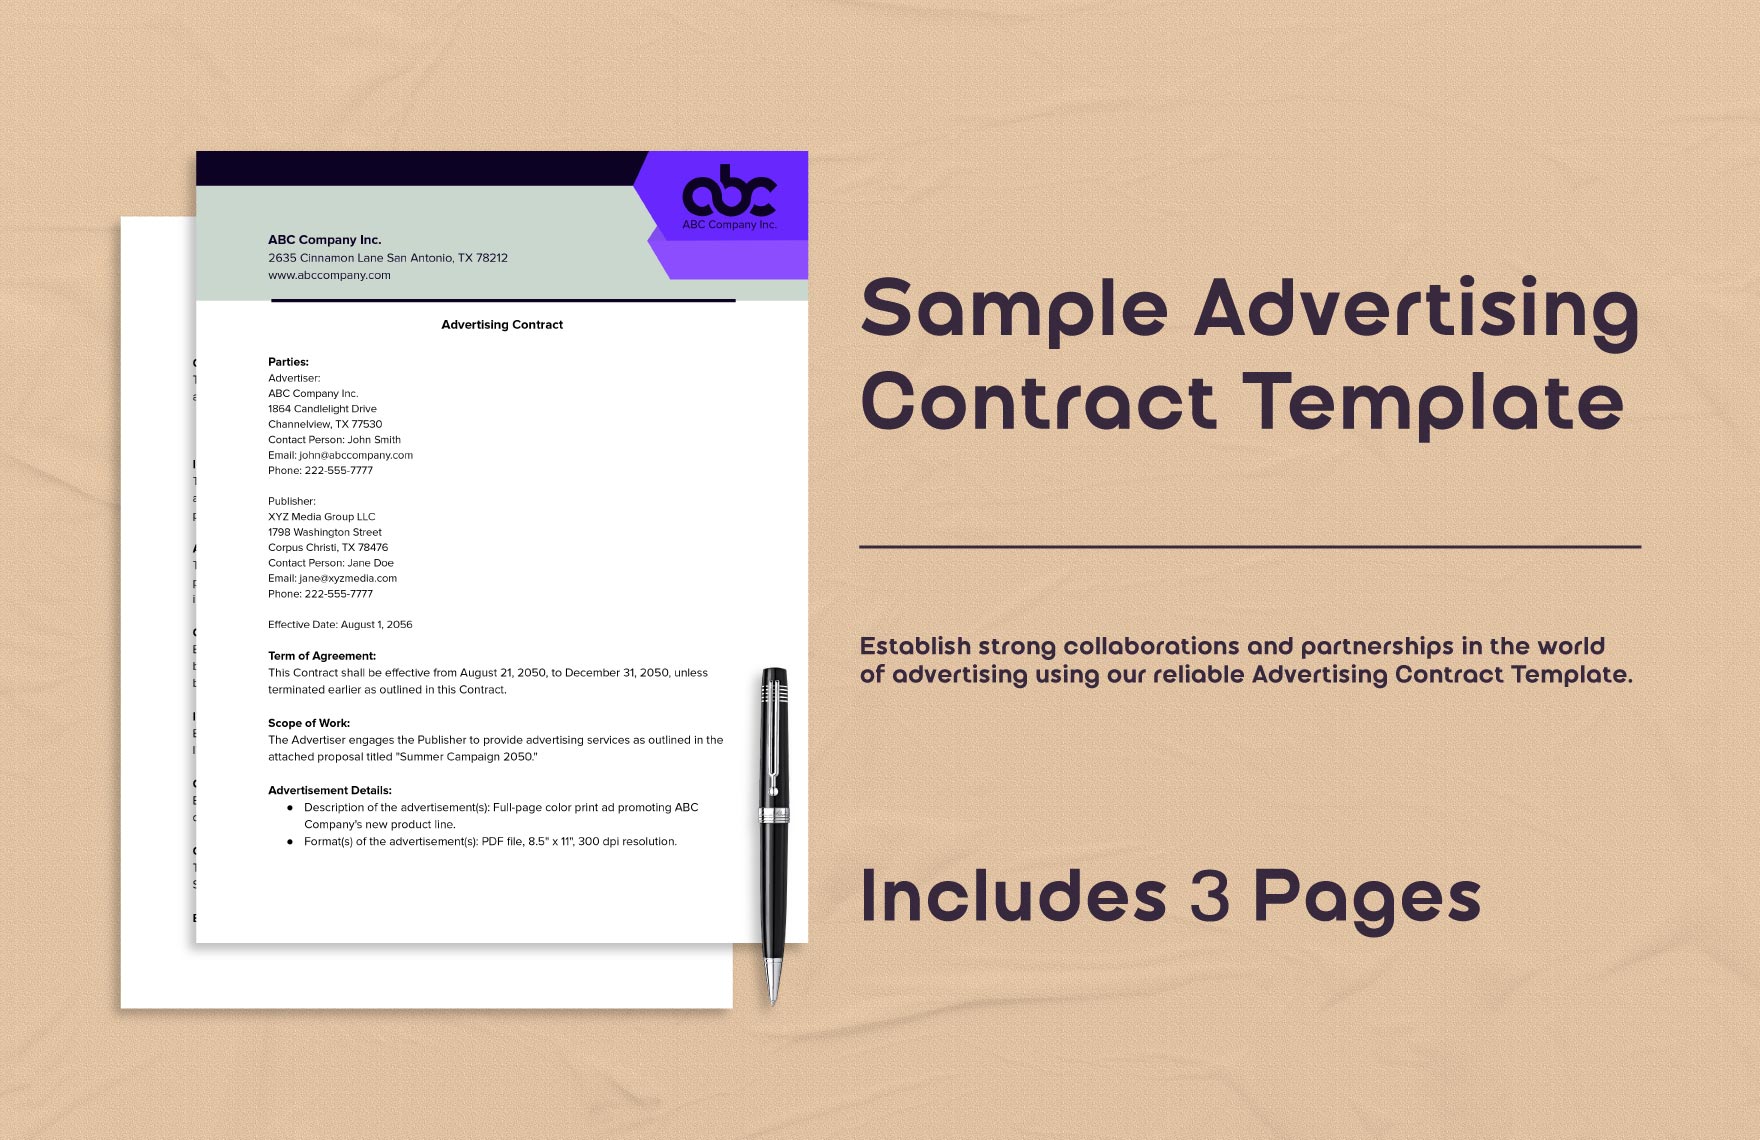 Sample Advertising Contract Template